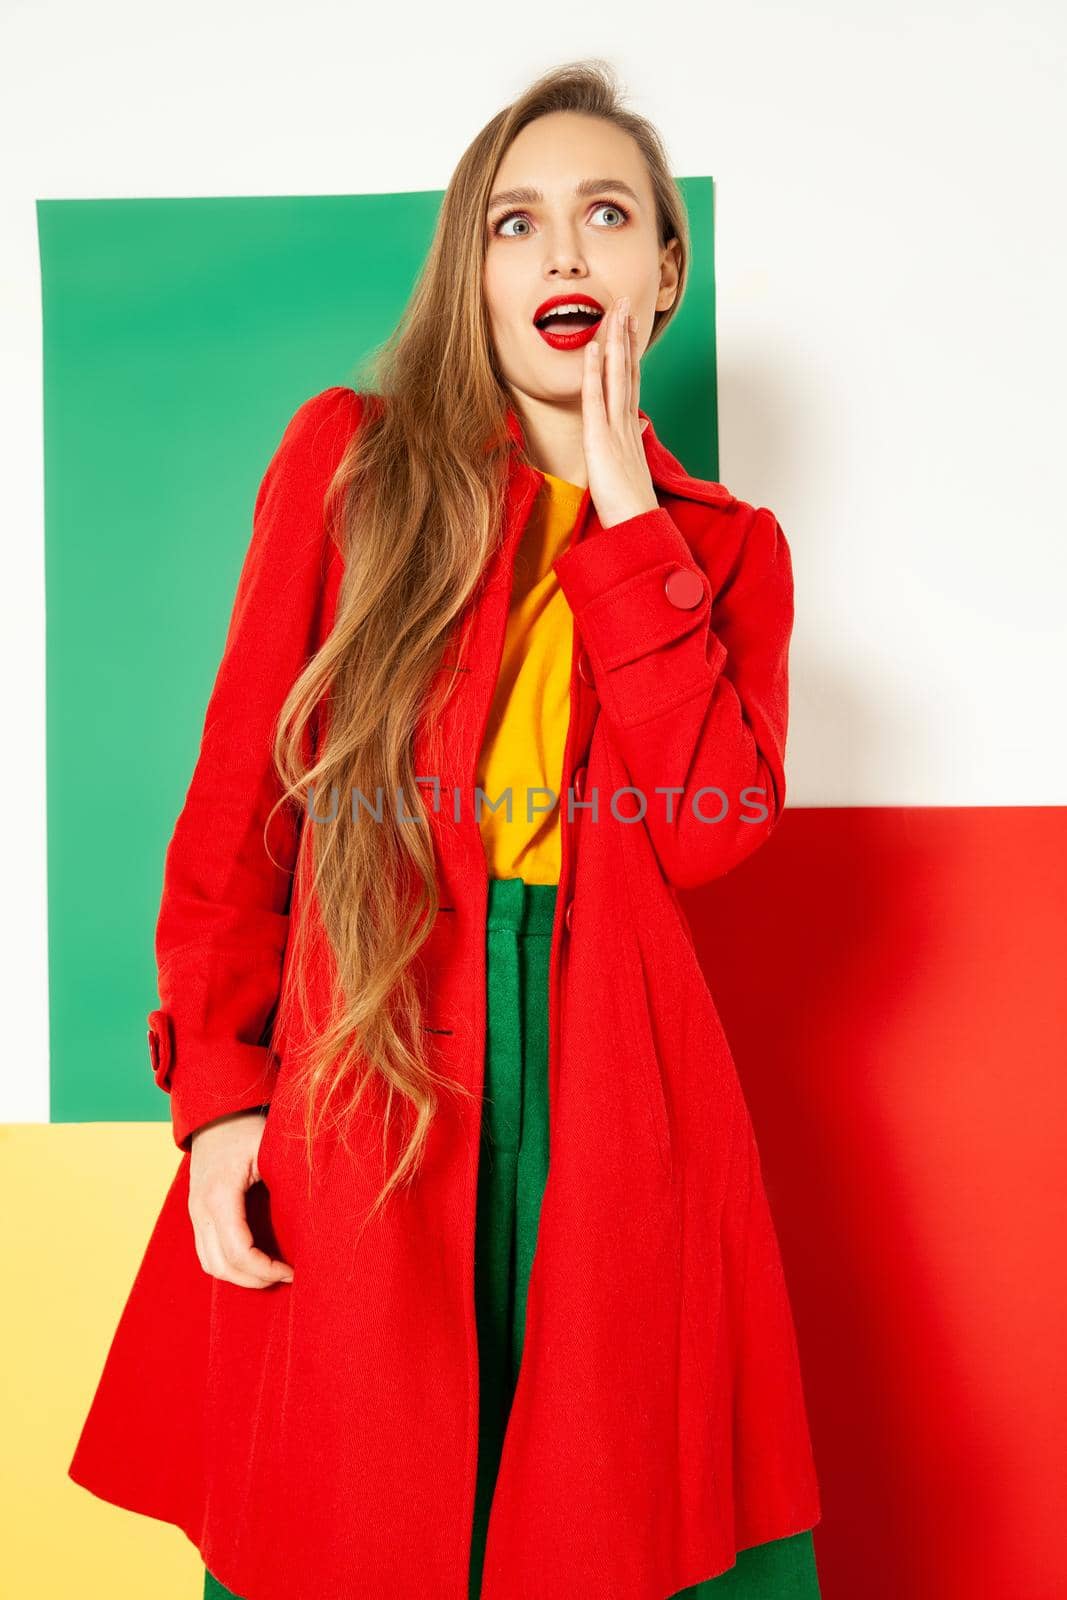 Amazed stylish woman in bright colorful outfit by Julenochek